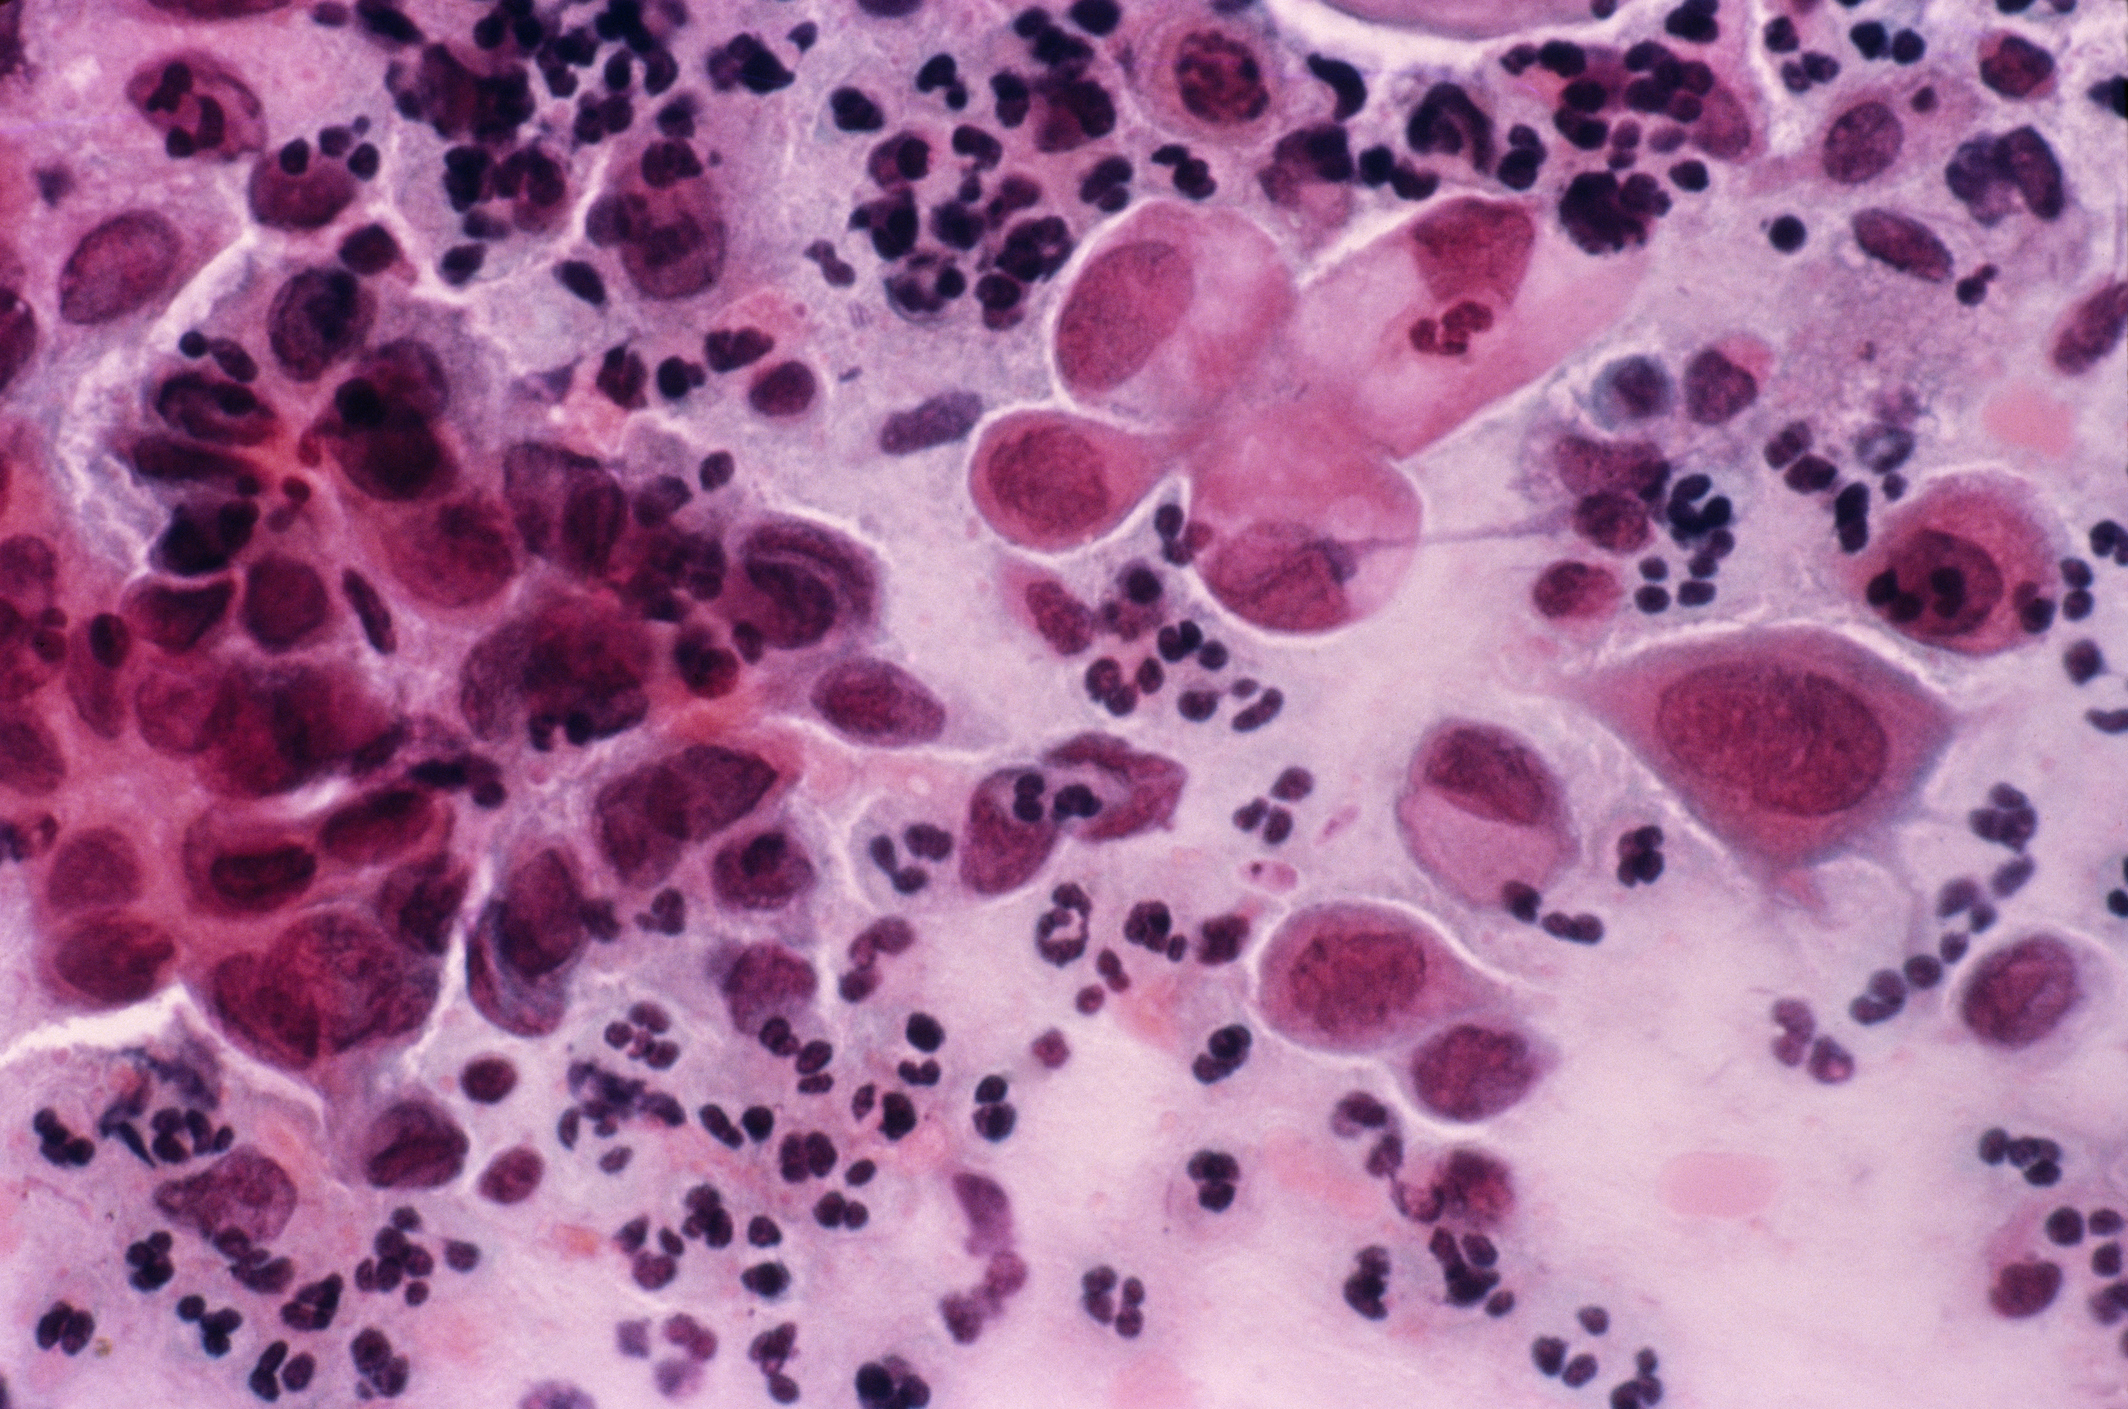 Light micrograph of a vaginal smear showing cancer cells (large pink cells with purple nuclei).